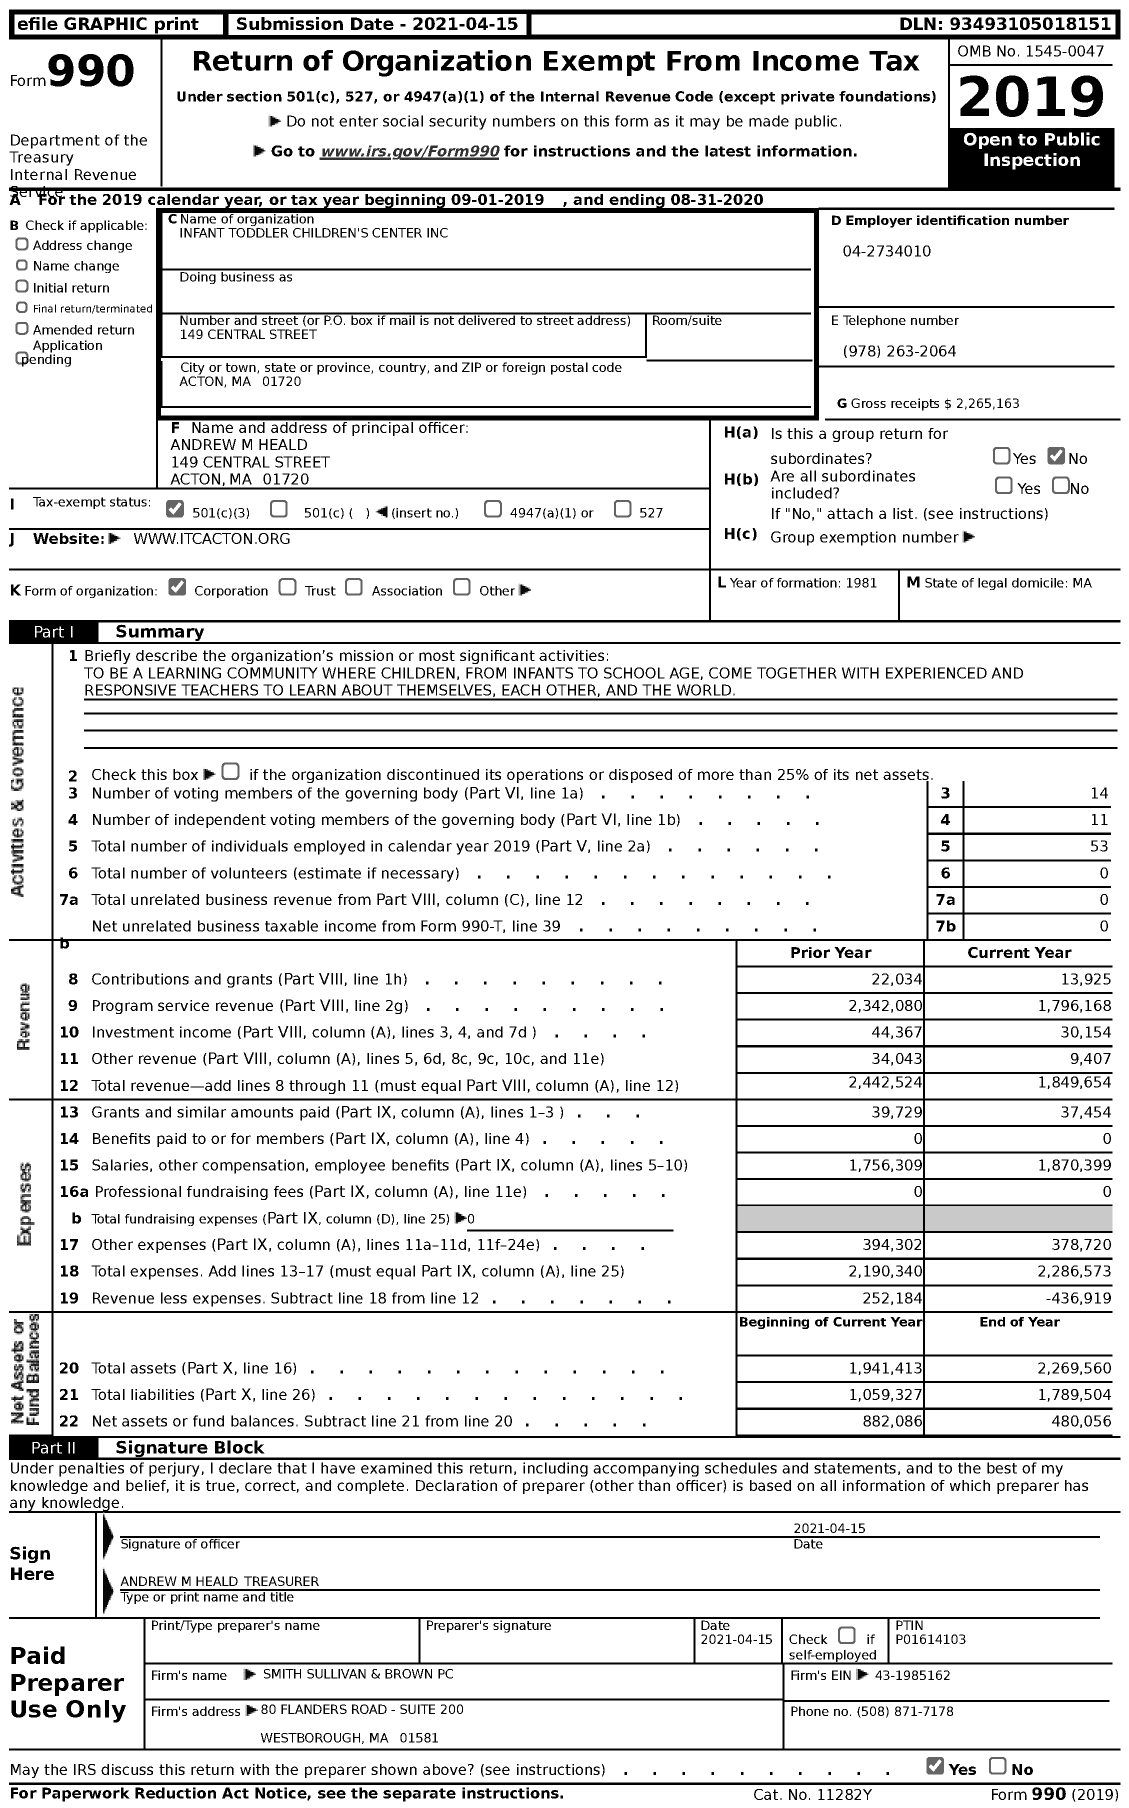 Image of first page of 2019 Form 990 for Infant Toddler Children's Center (ITC)